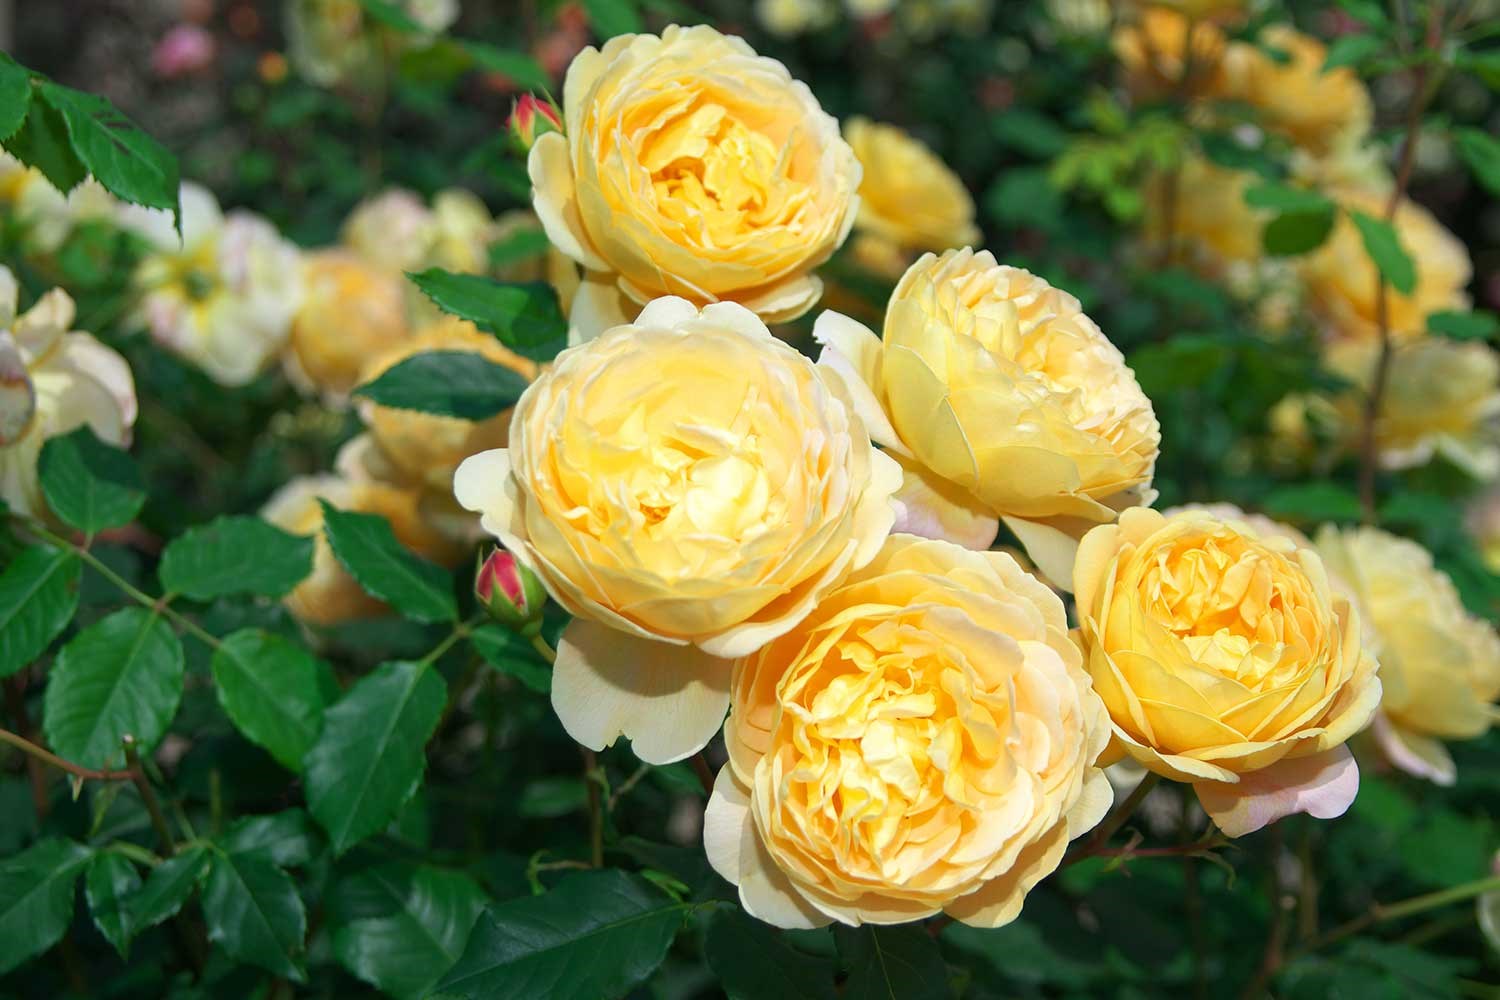 How to care for roses | Better Homes and Gardens